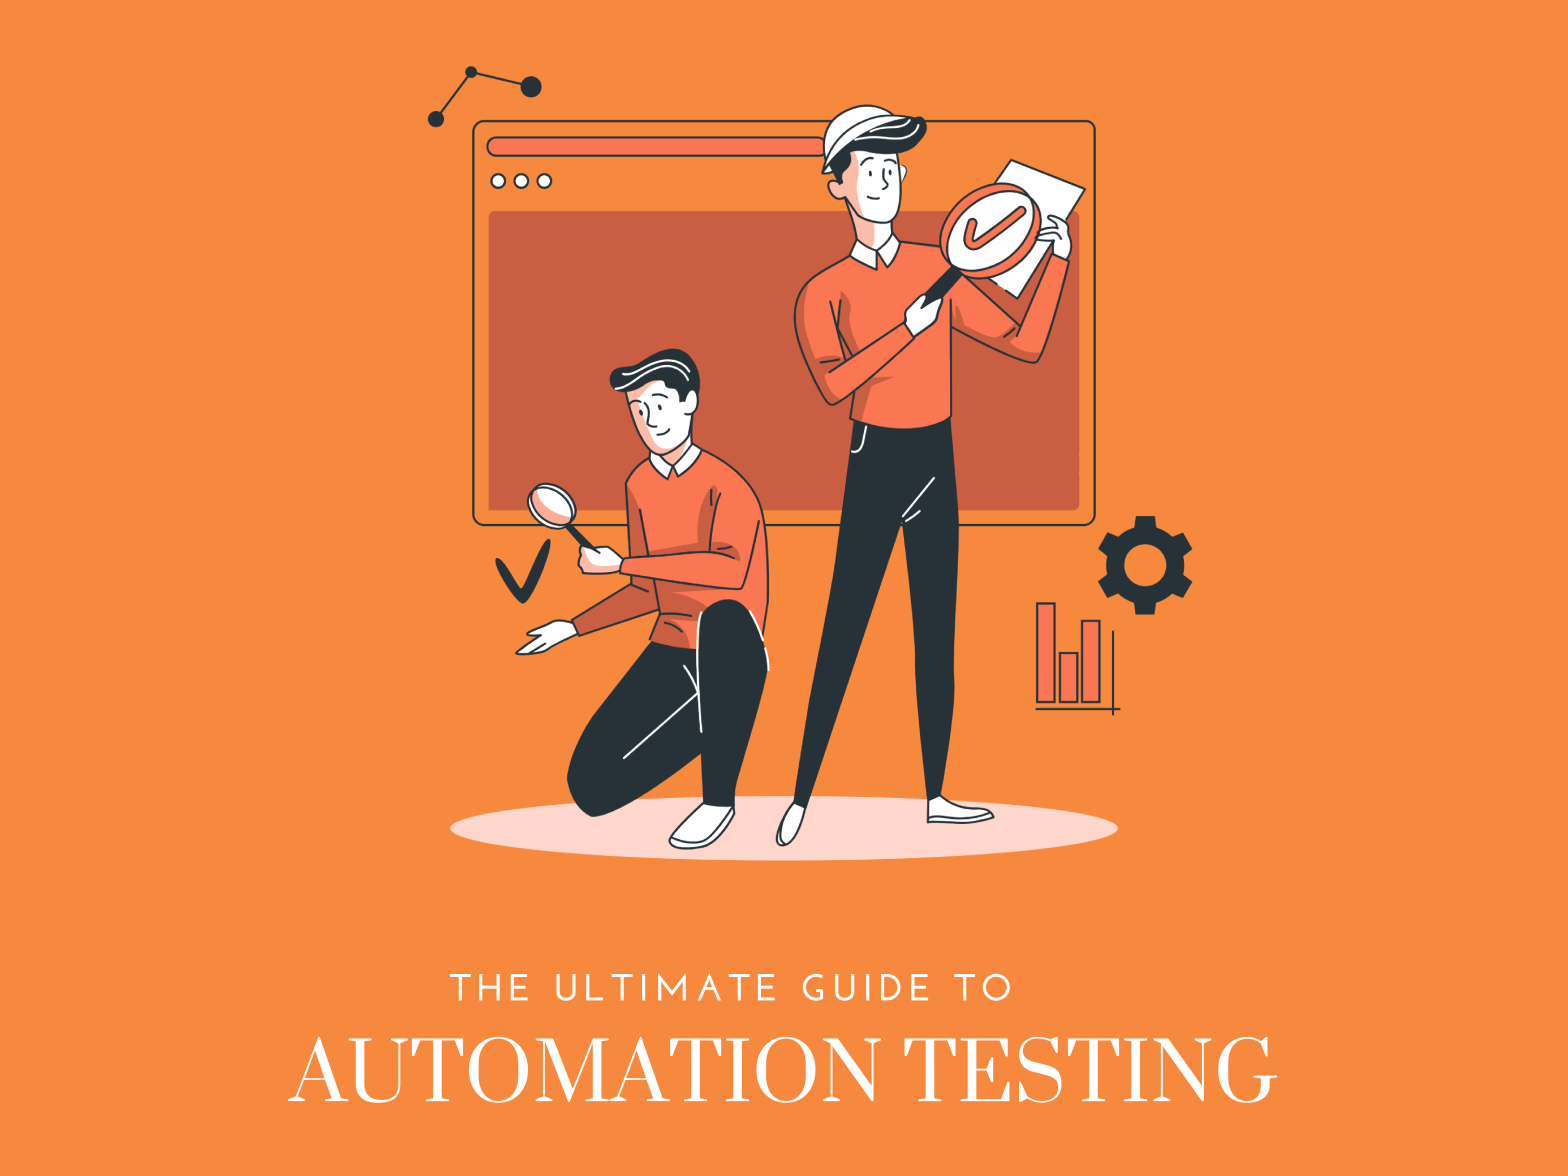 The Ultimate Guide to Automation Testing